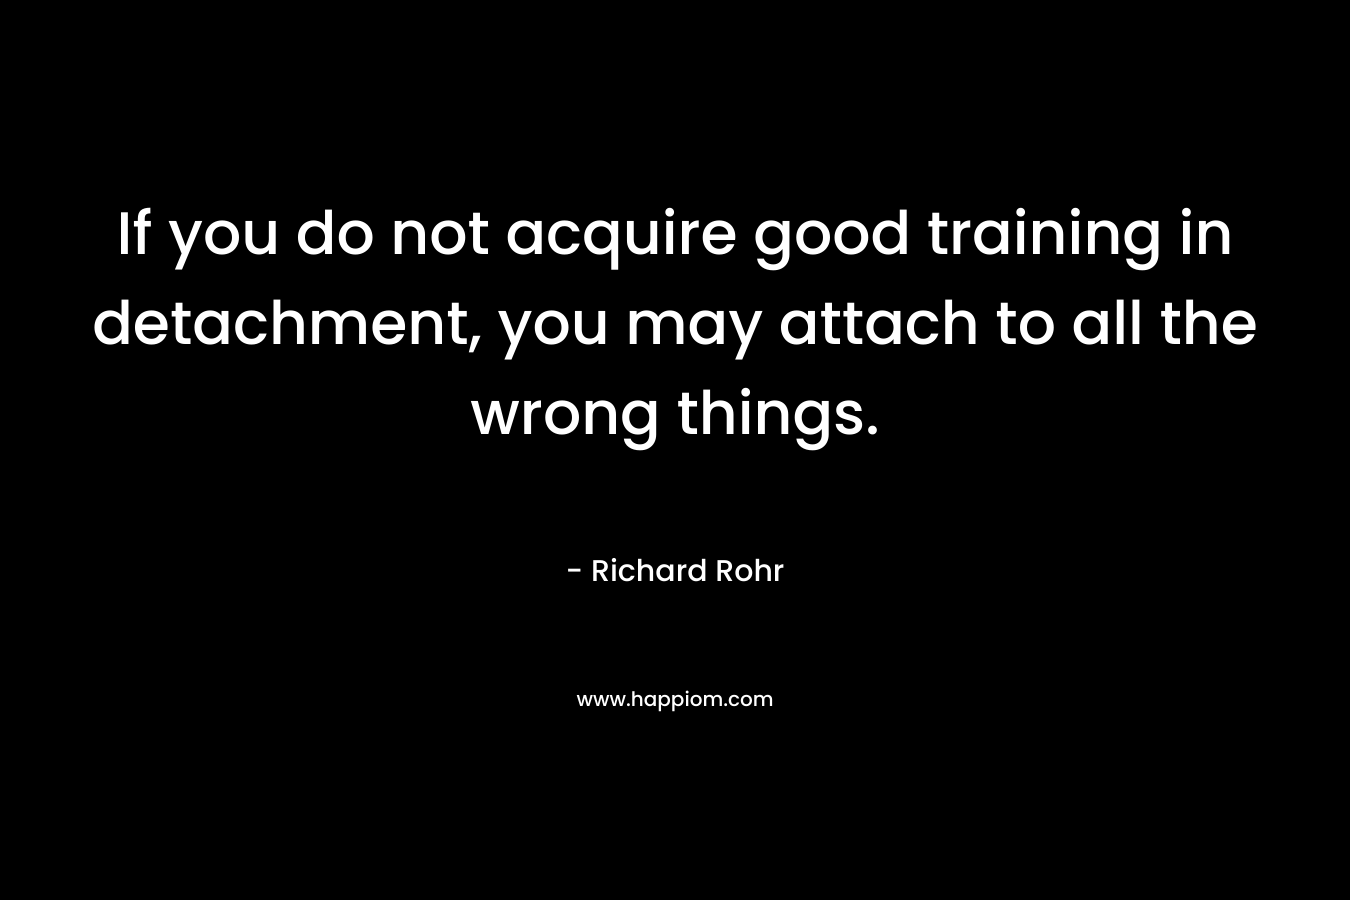 If you do not acquire good training in detachment, you may attach to all the wrong things.